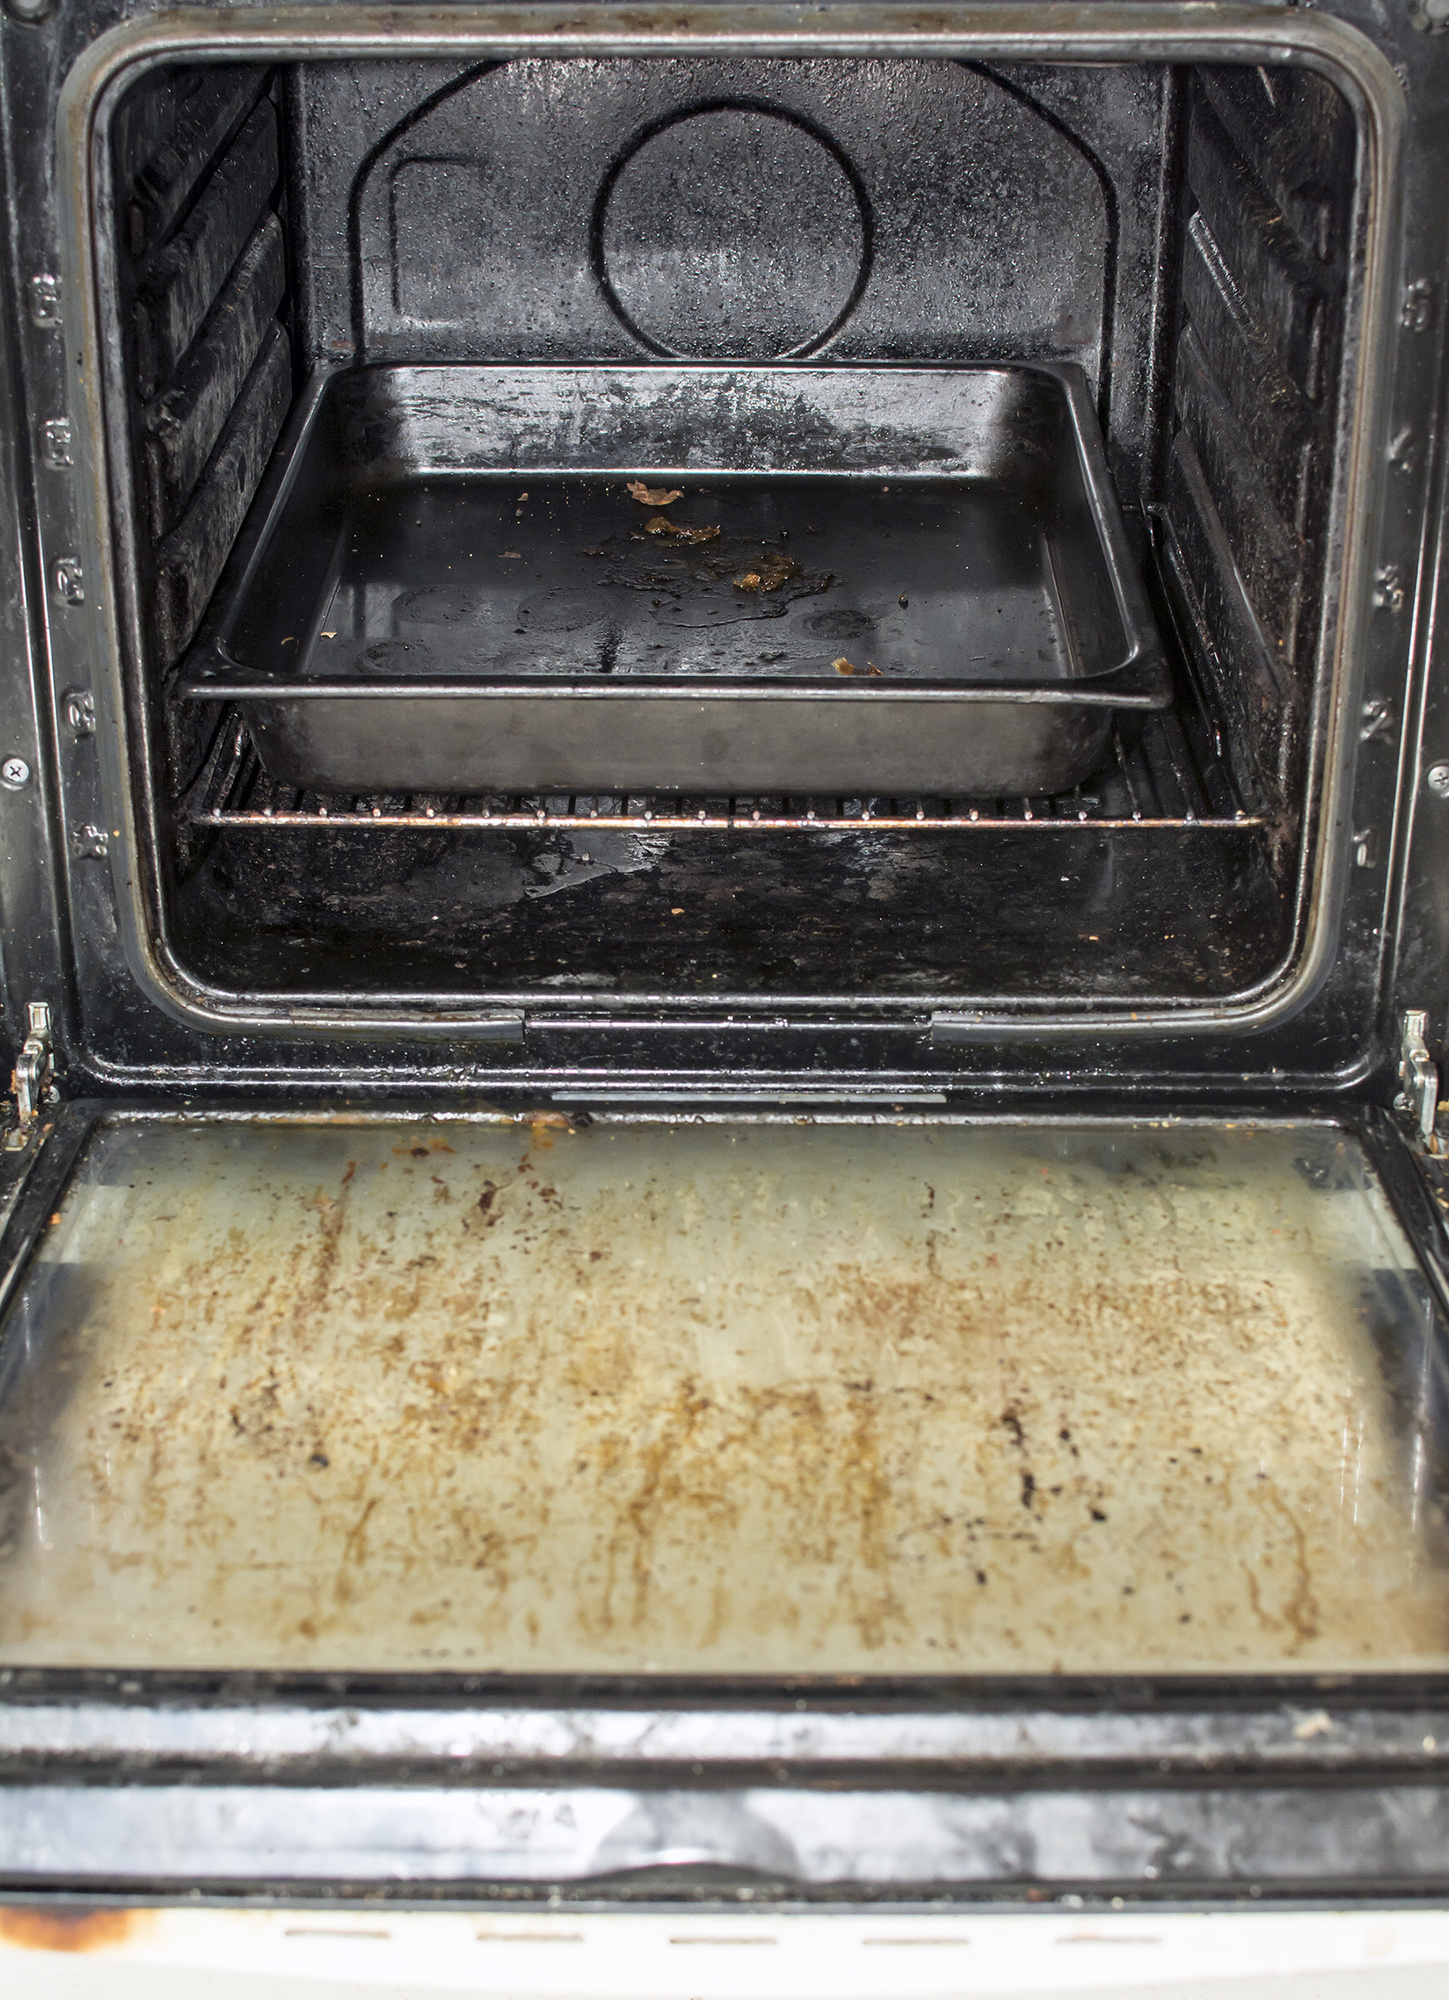 https://www.360precisioncleaning.com/wp-content/uploads/2018/12/how-to-clean-an-oven.jpeg